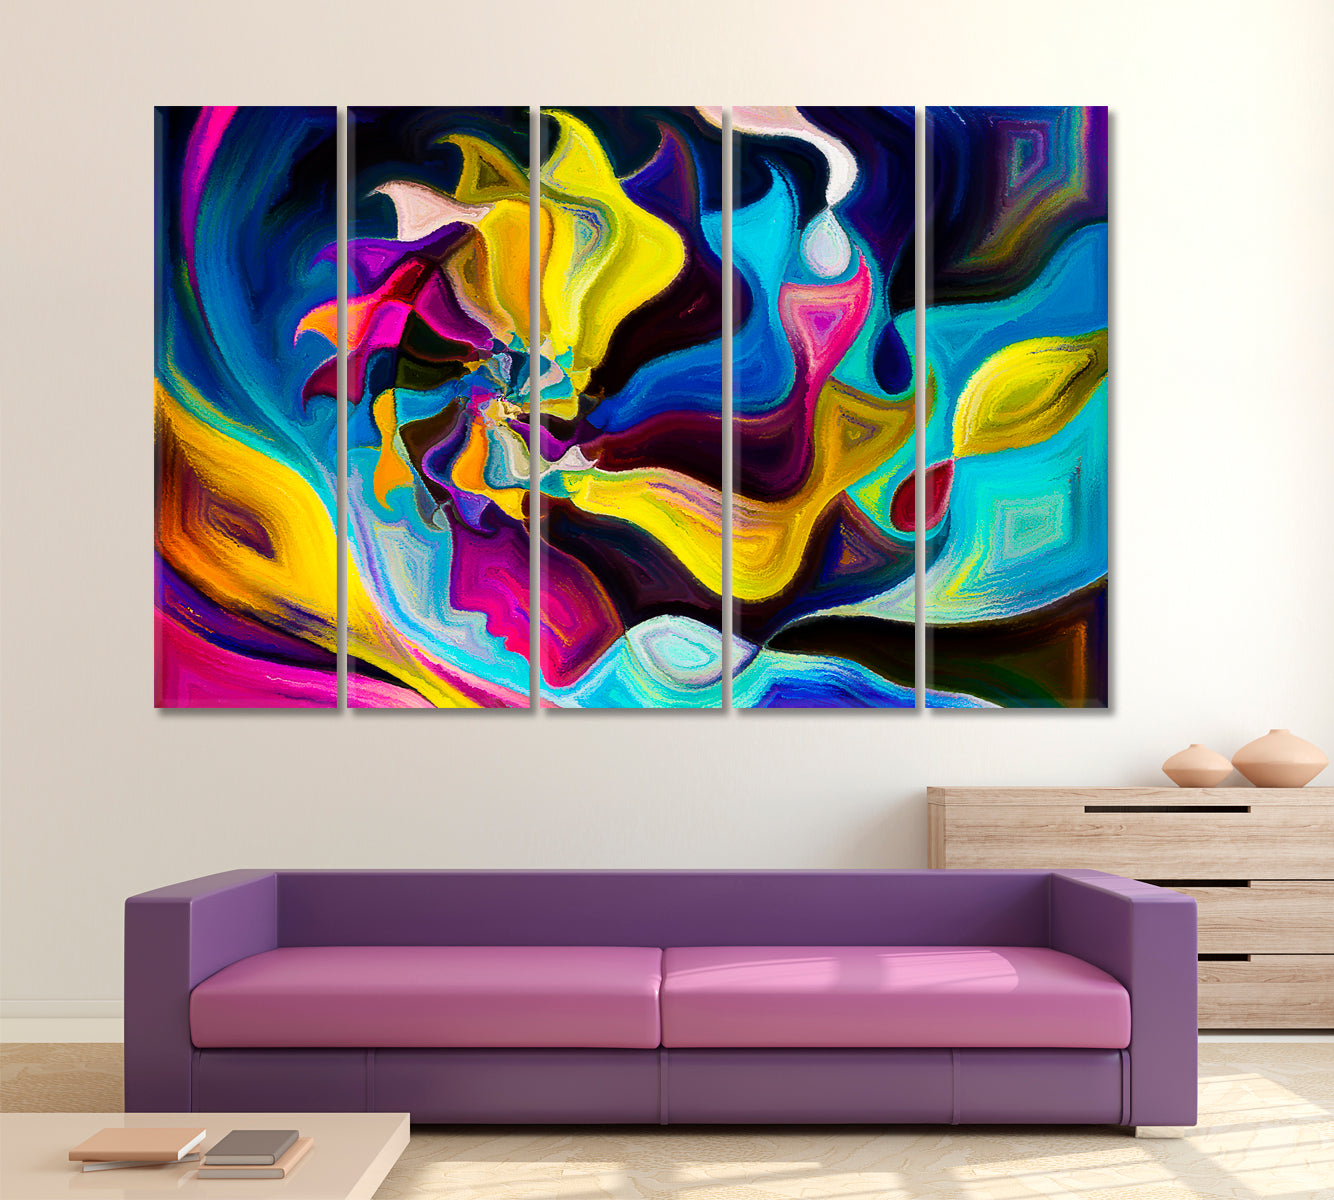 Live Forms, Human Profile and Lines Abstract Design Abstract Art Print Artesty 5 panels 36" x 24" 